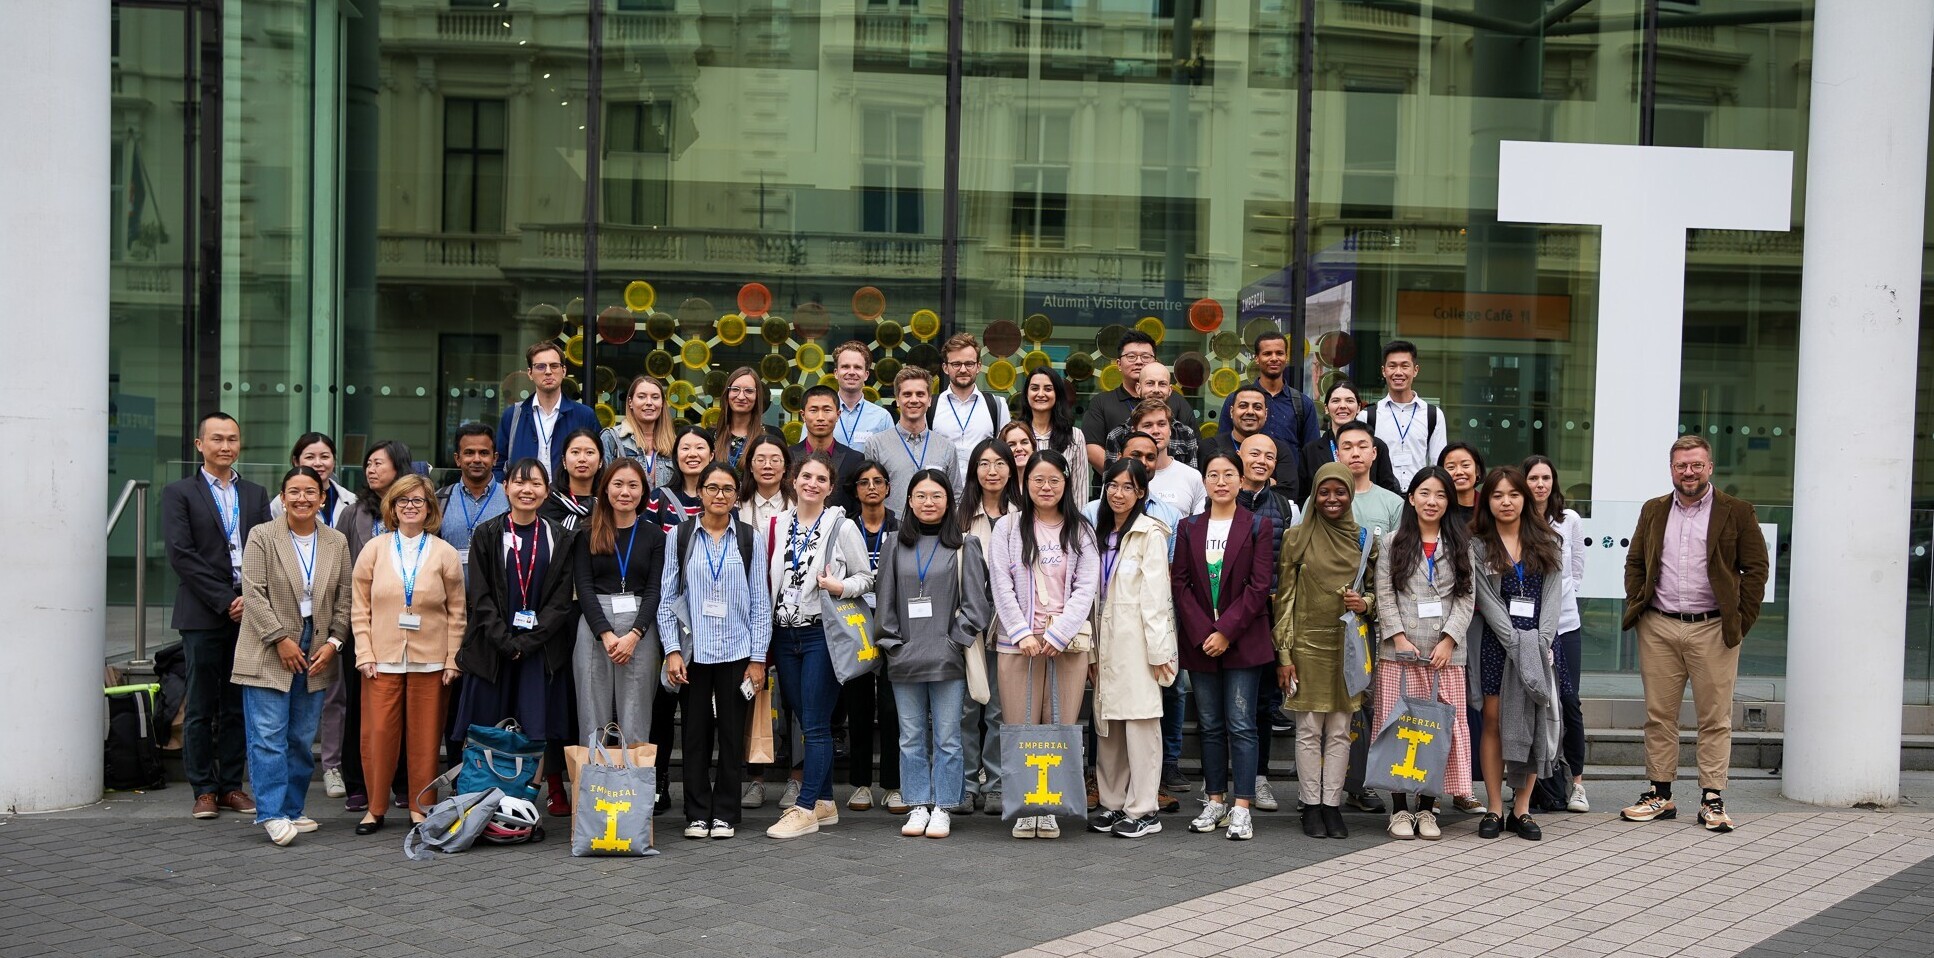 Participants for this year's Global Fellows Programme posing for a picture outside Imperial College London's Main Entrance.